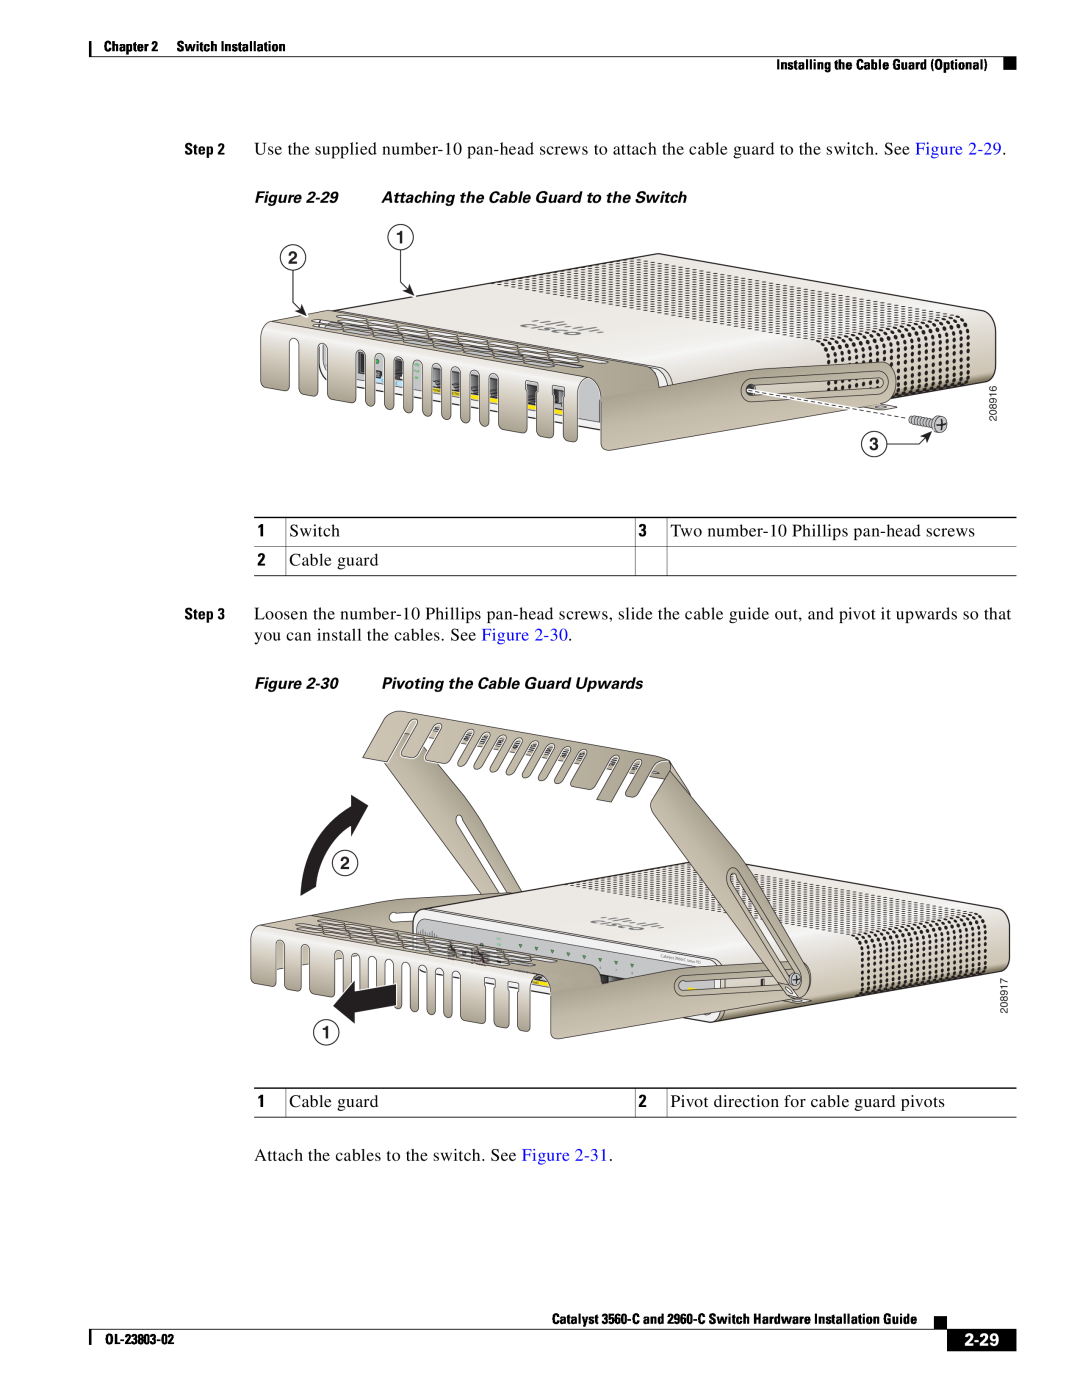 Cisco Systems 3560-C manual 2-29, 29 Attaching the Cable Guard to the Switch, 30 Pivoting the Cable Guard Upwards, Catalyst 